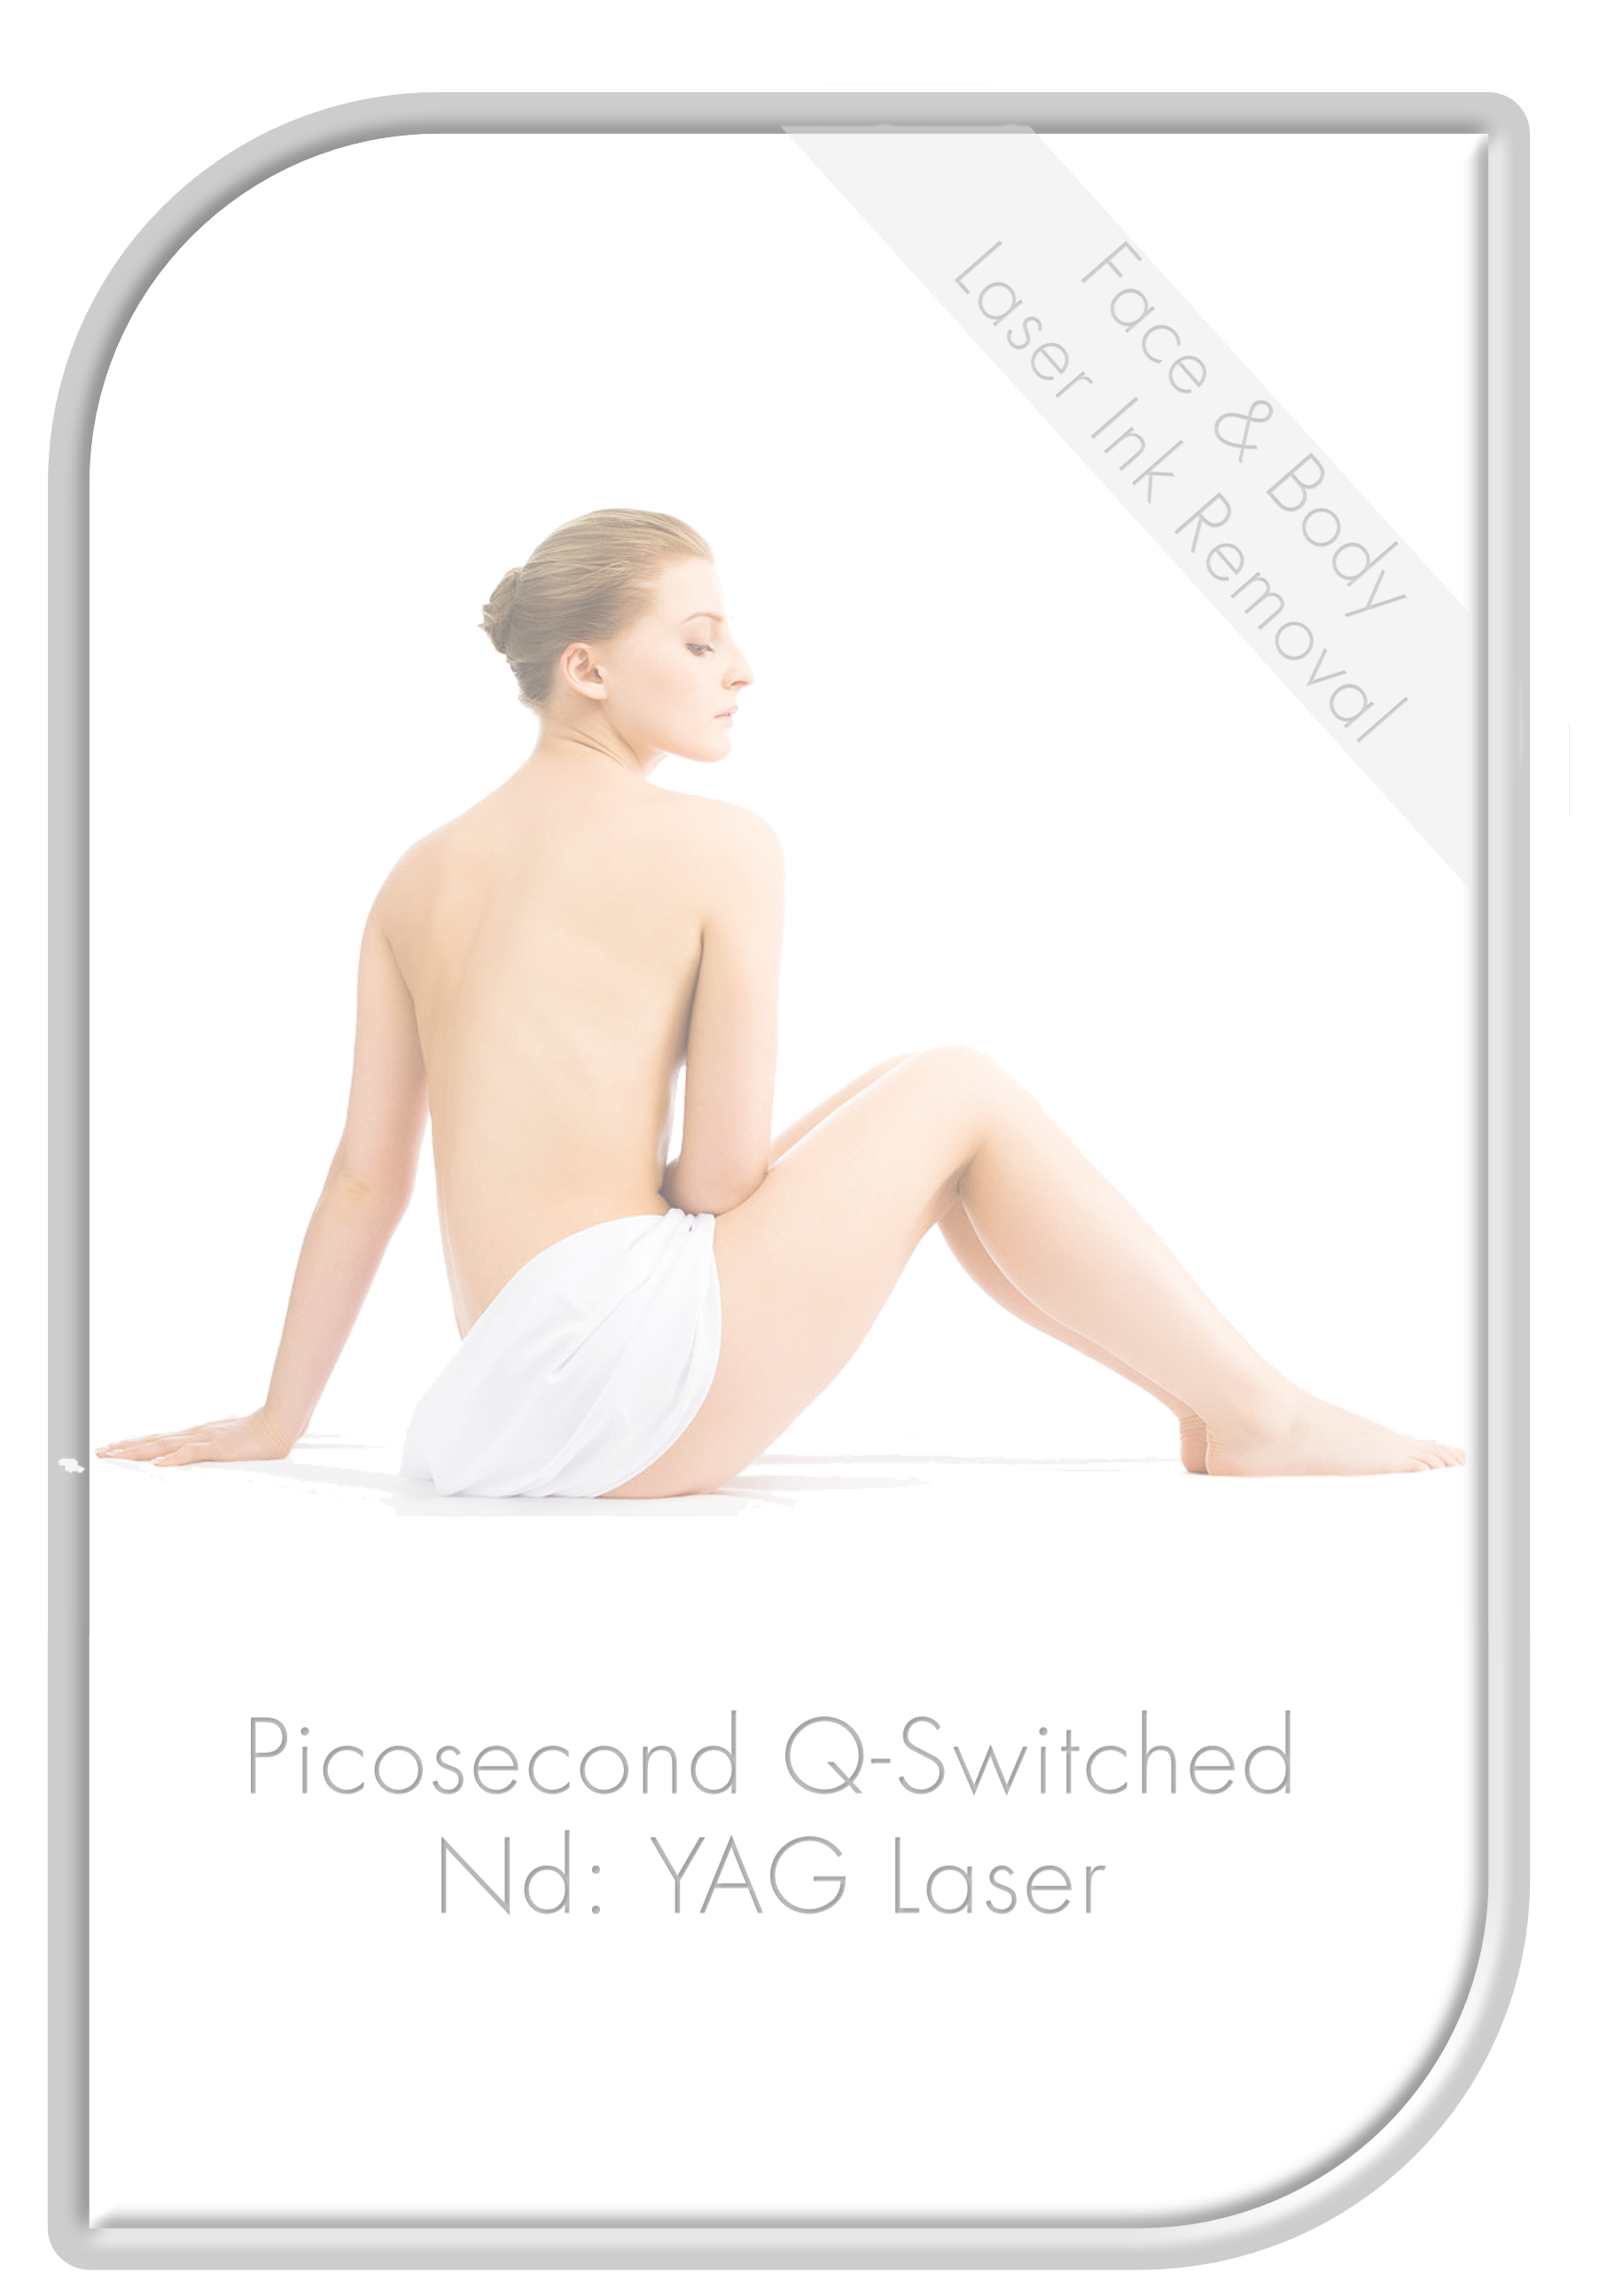 Picosecond Q-Switched Laser for Tattoo Removal